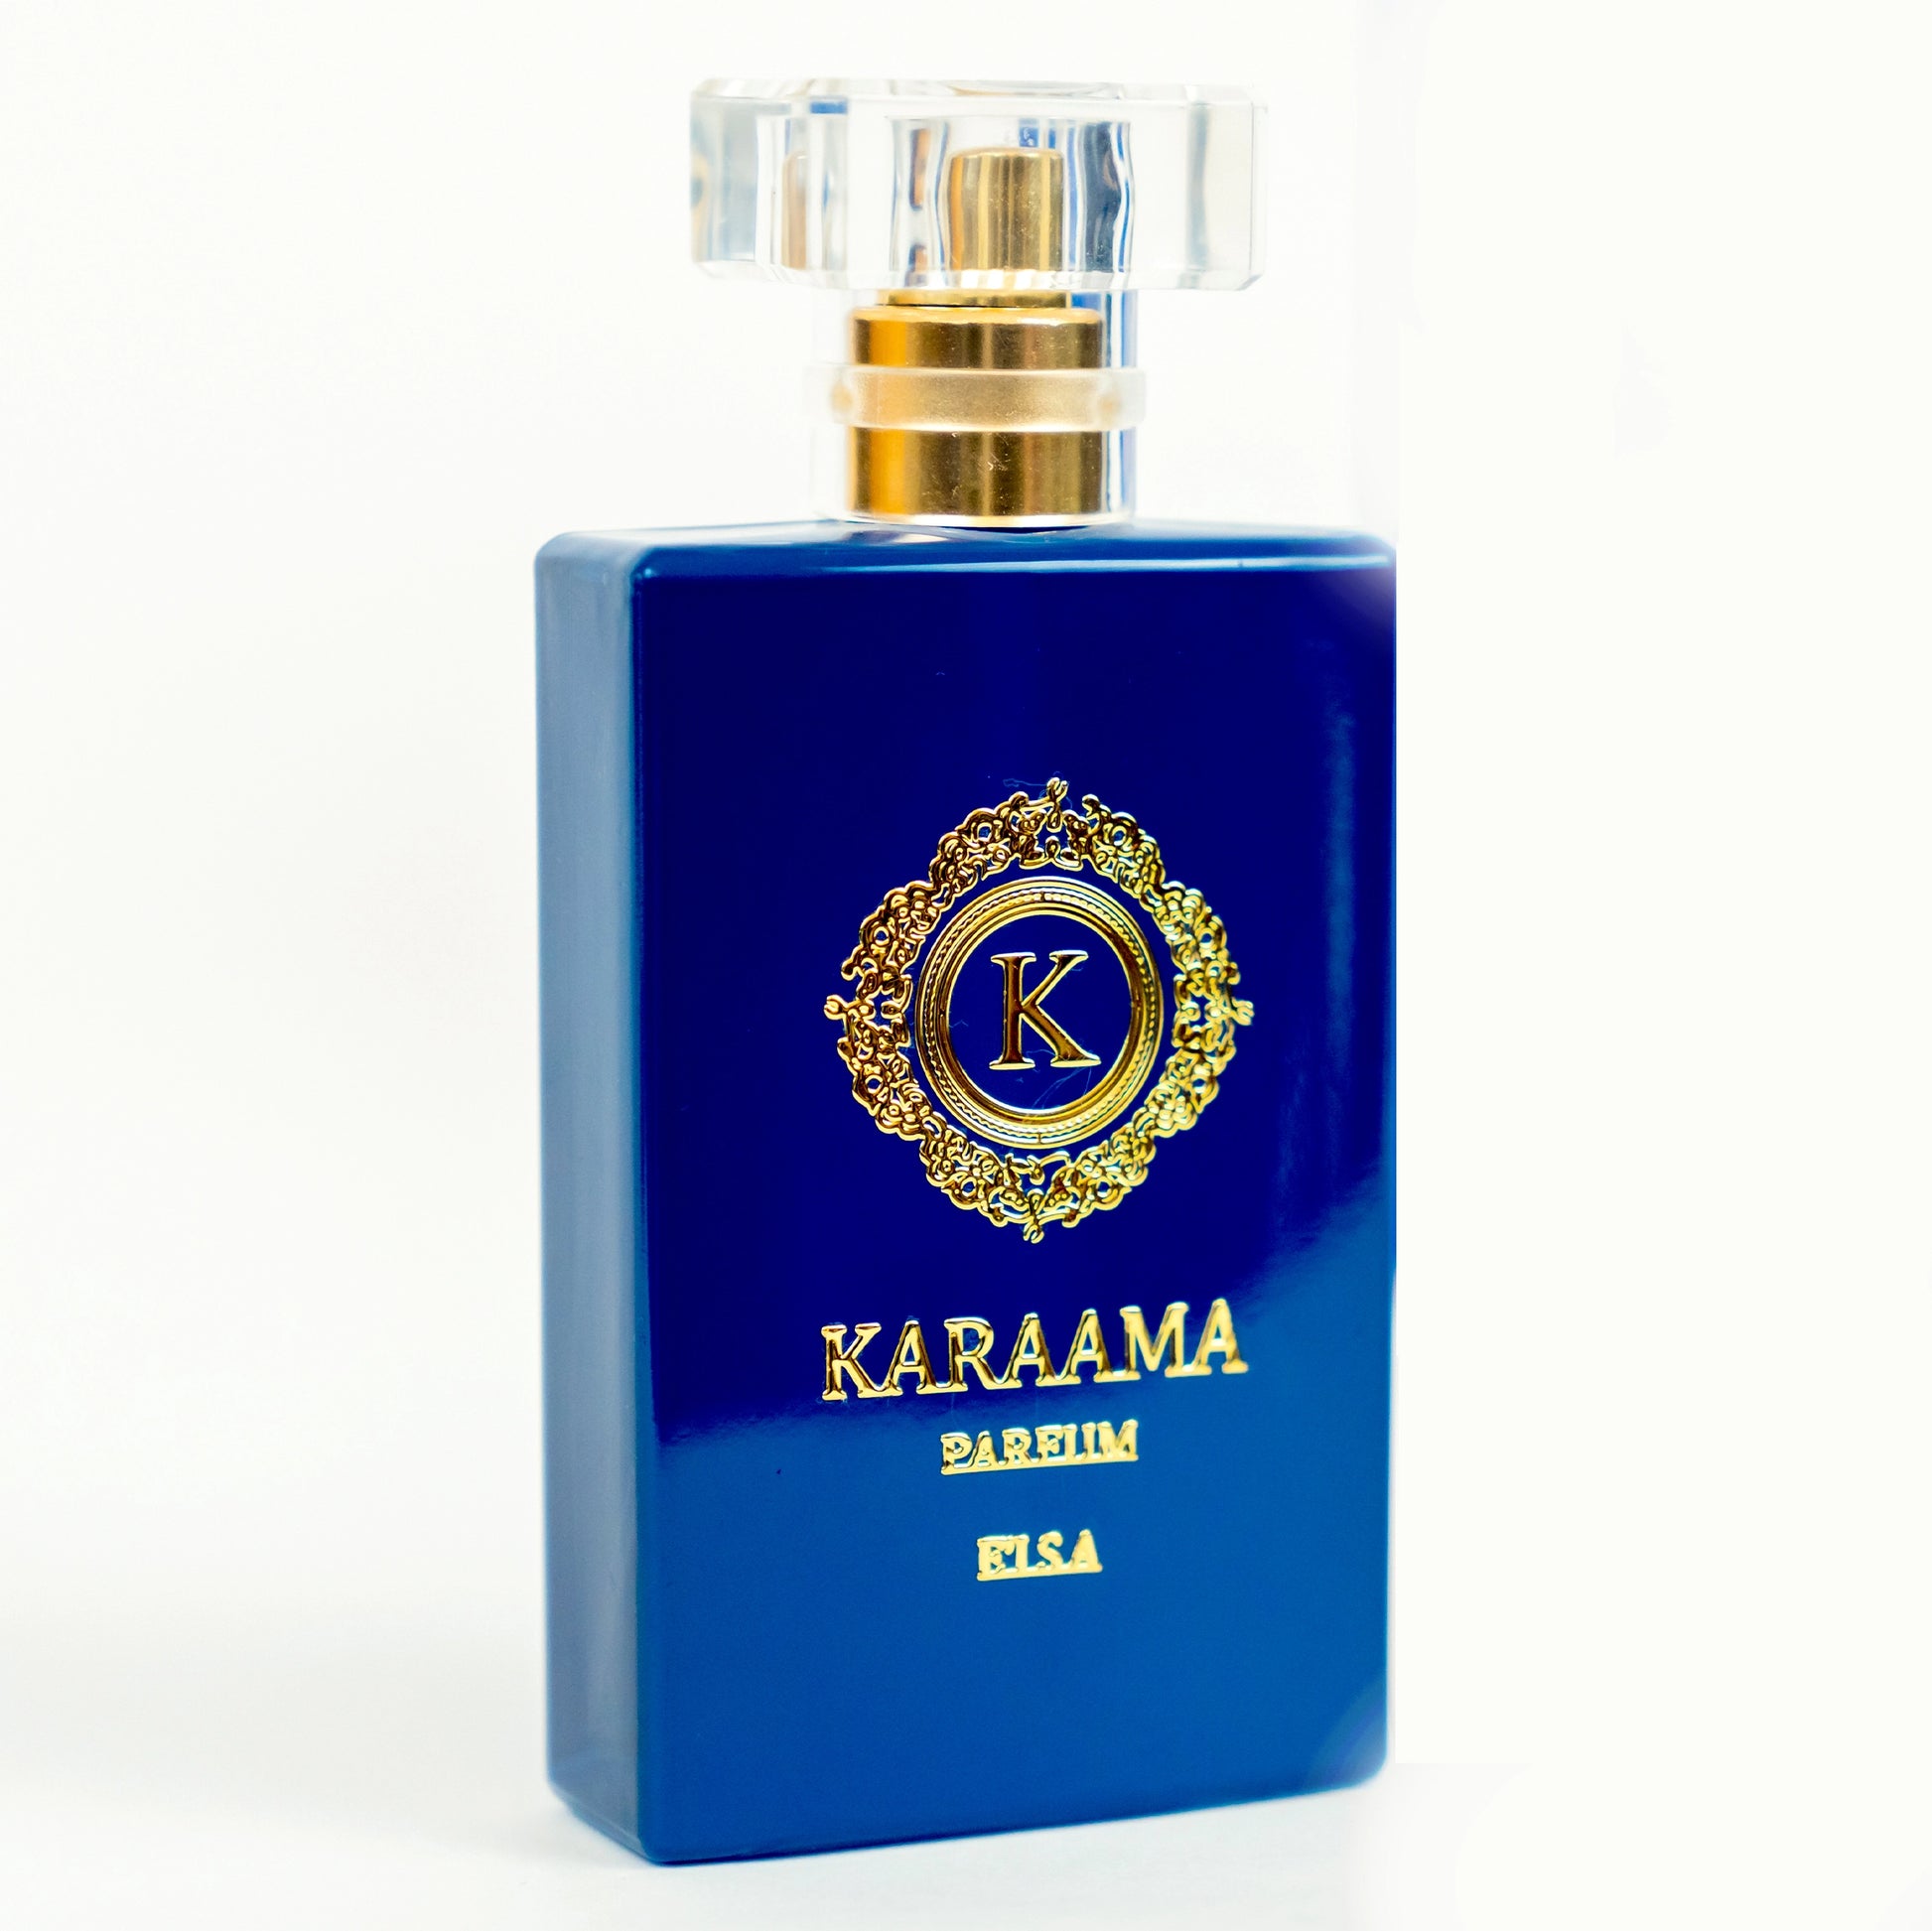 Elegant blue perfume bottle with golden detailing, showcasing the luxurious KARAAMA fragrance, isolated on a white background – perfect for sophisticated appeal. #Perfume #LuxuryScent #EauDeParfum #Style #BeautyTrend